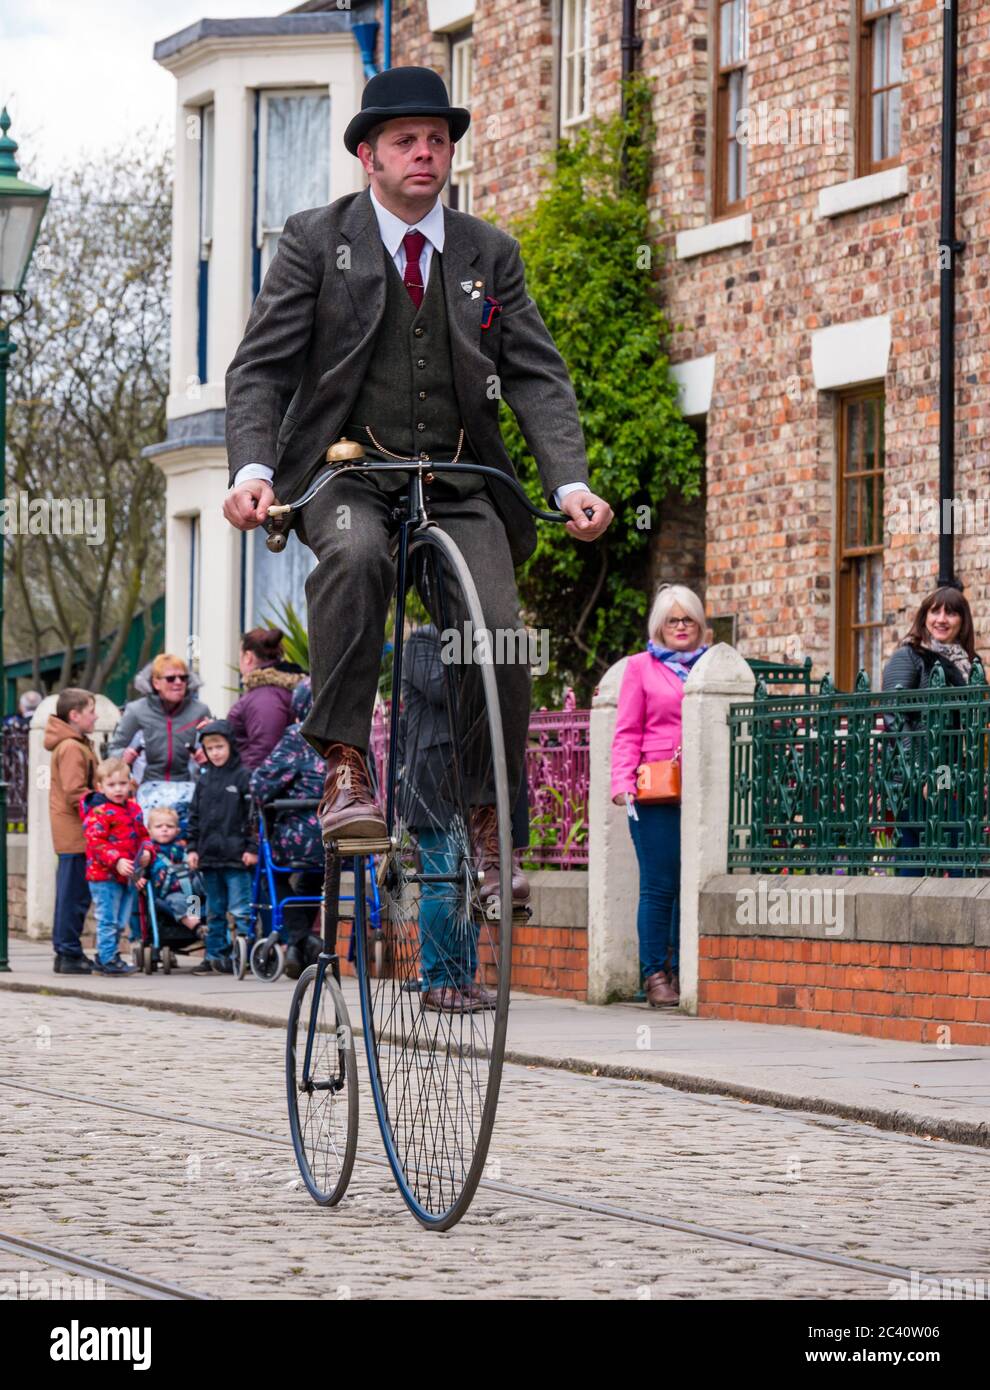 Man riding penny farthing vintage bicycle in period costume, Beamish Museum, Durham County, England, UK, Stock Photo